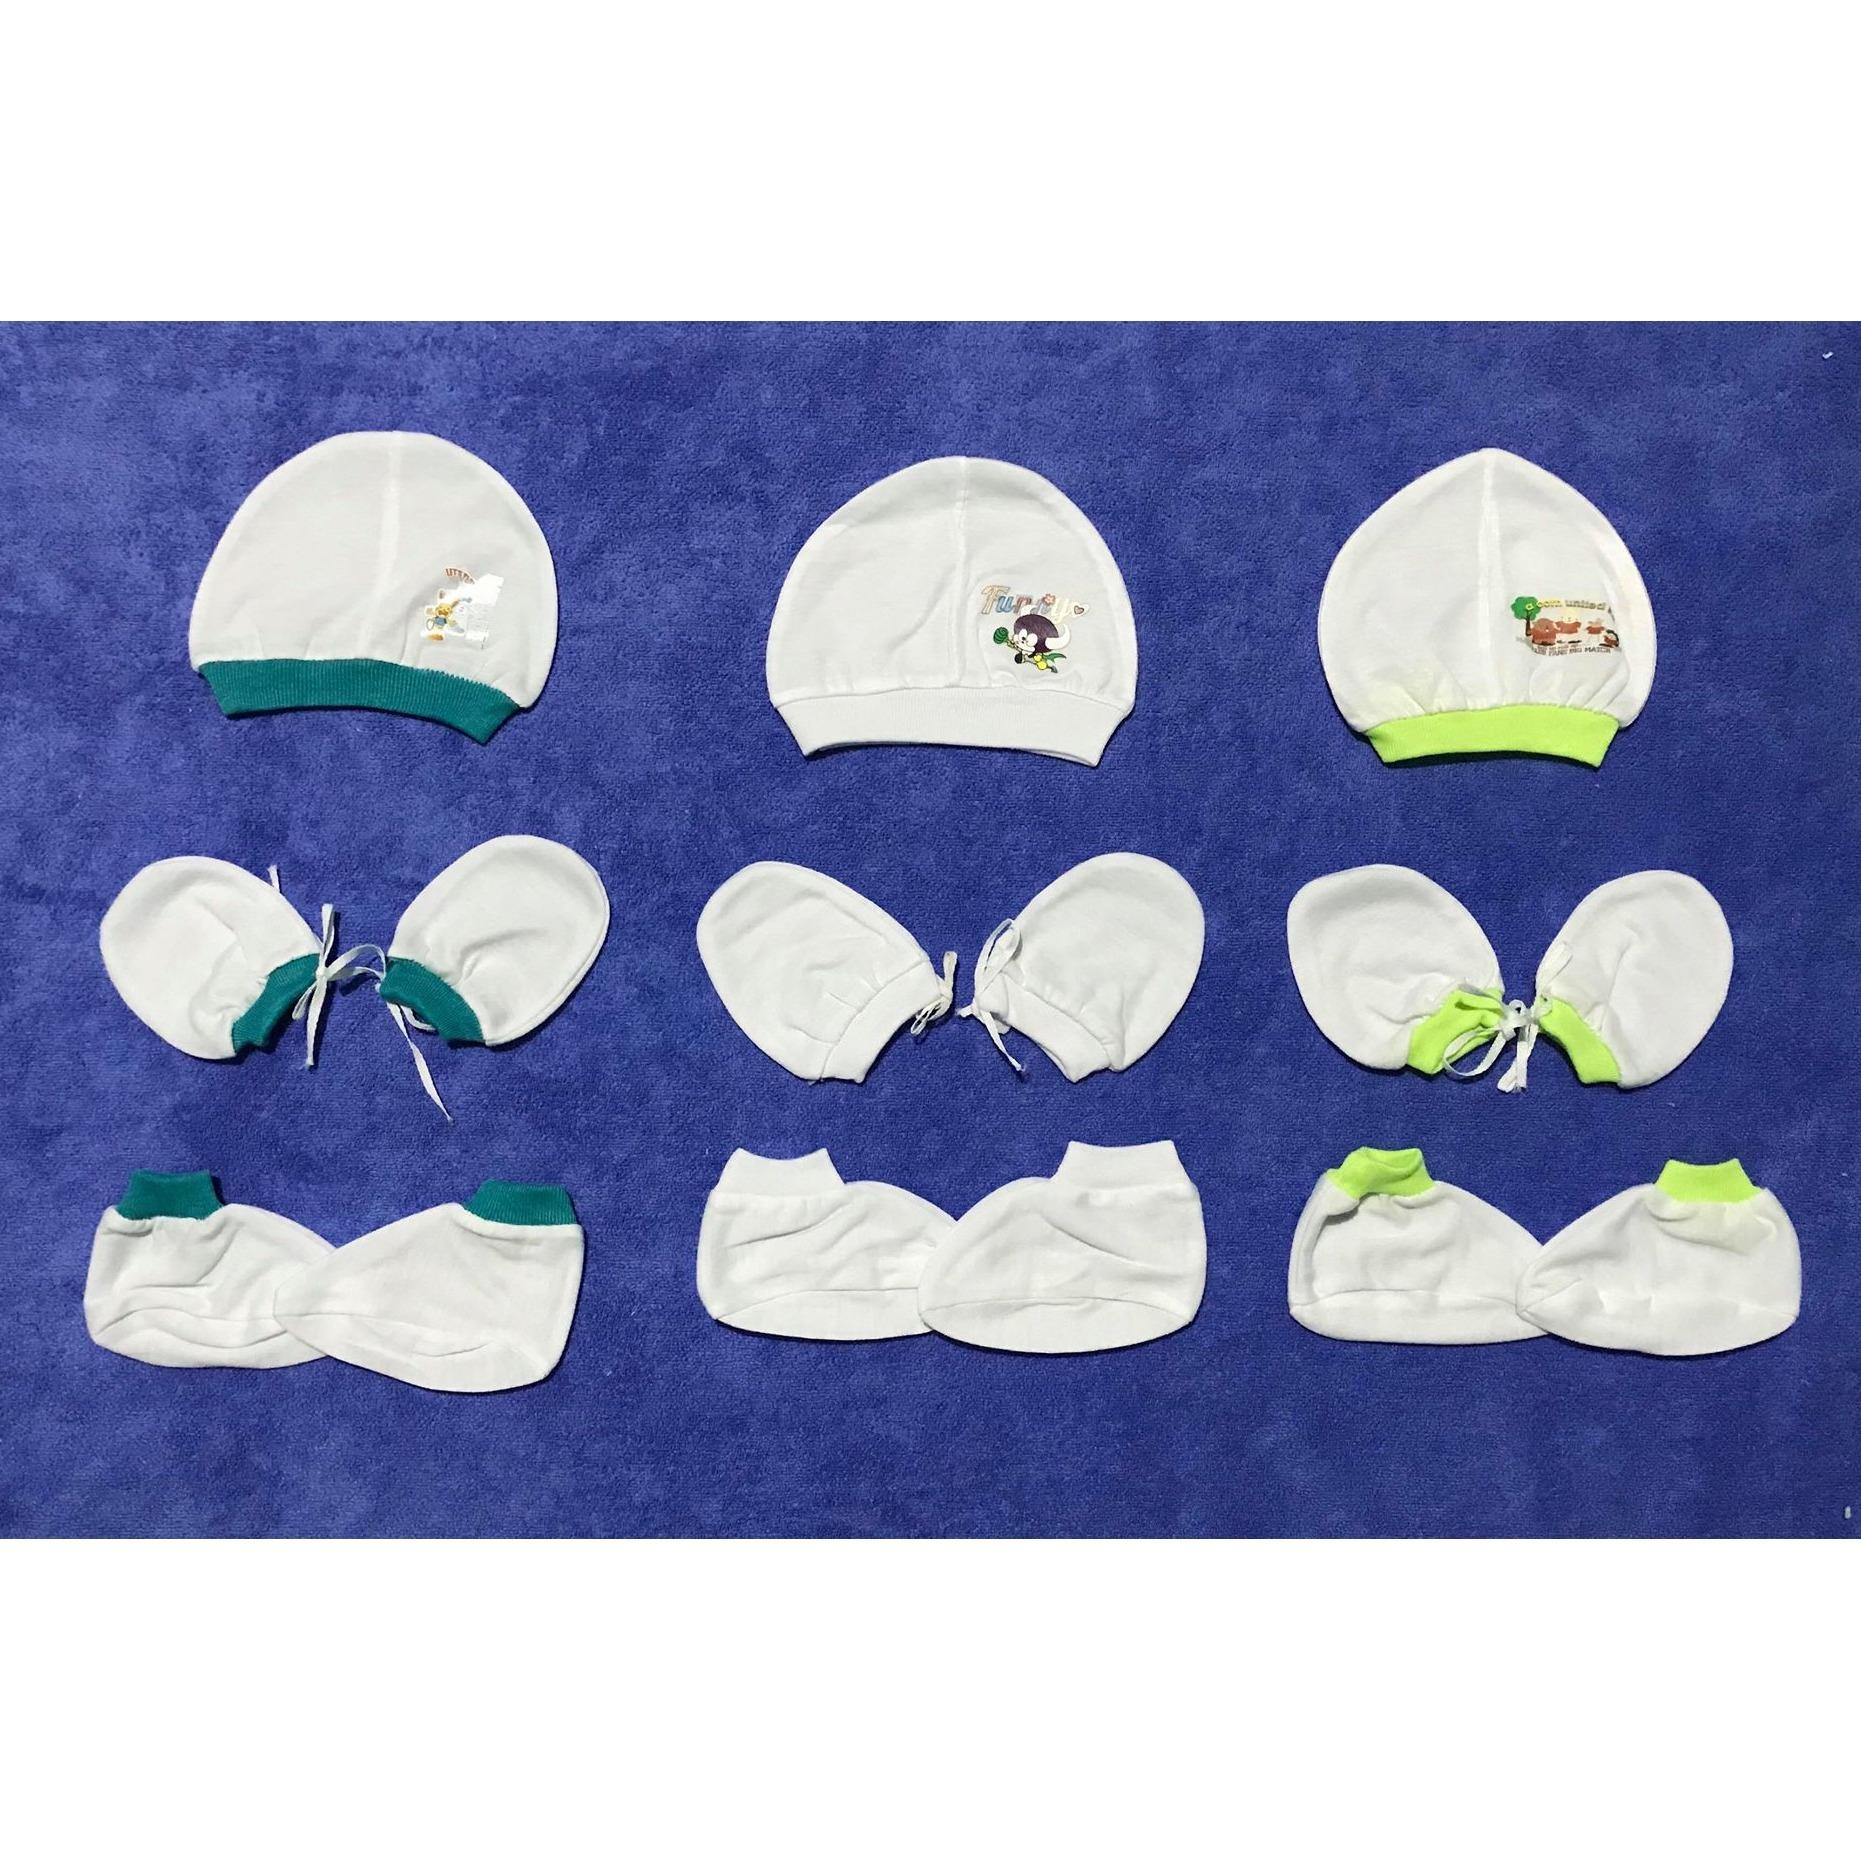 Newborn Babies 3in1 Mittens, Hat and 